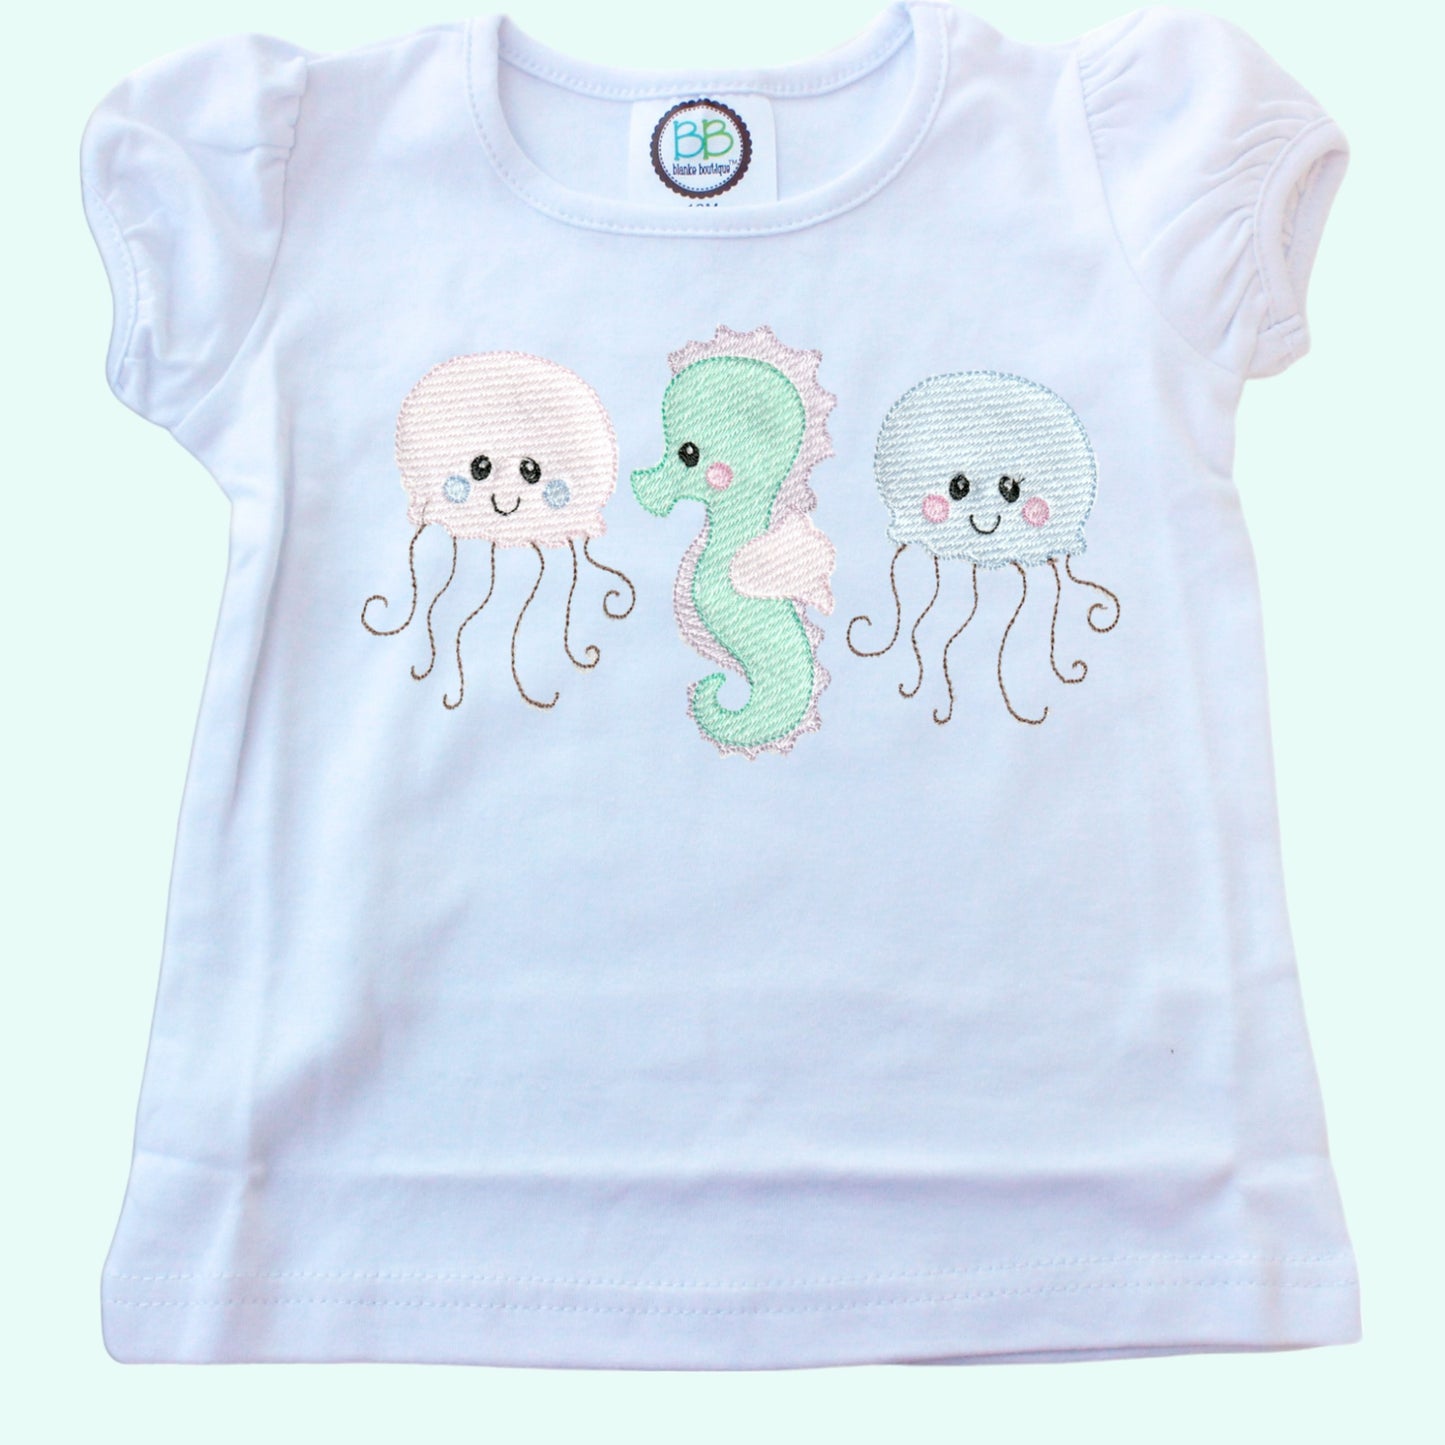 Under the Sea shirt Personalized under the Sea shirt